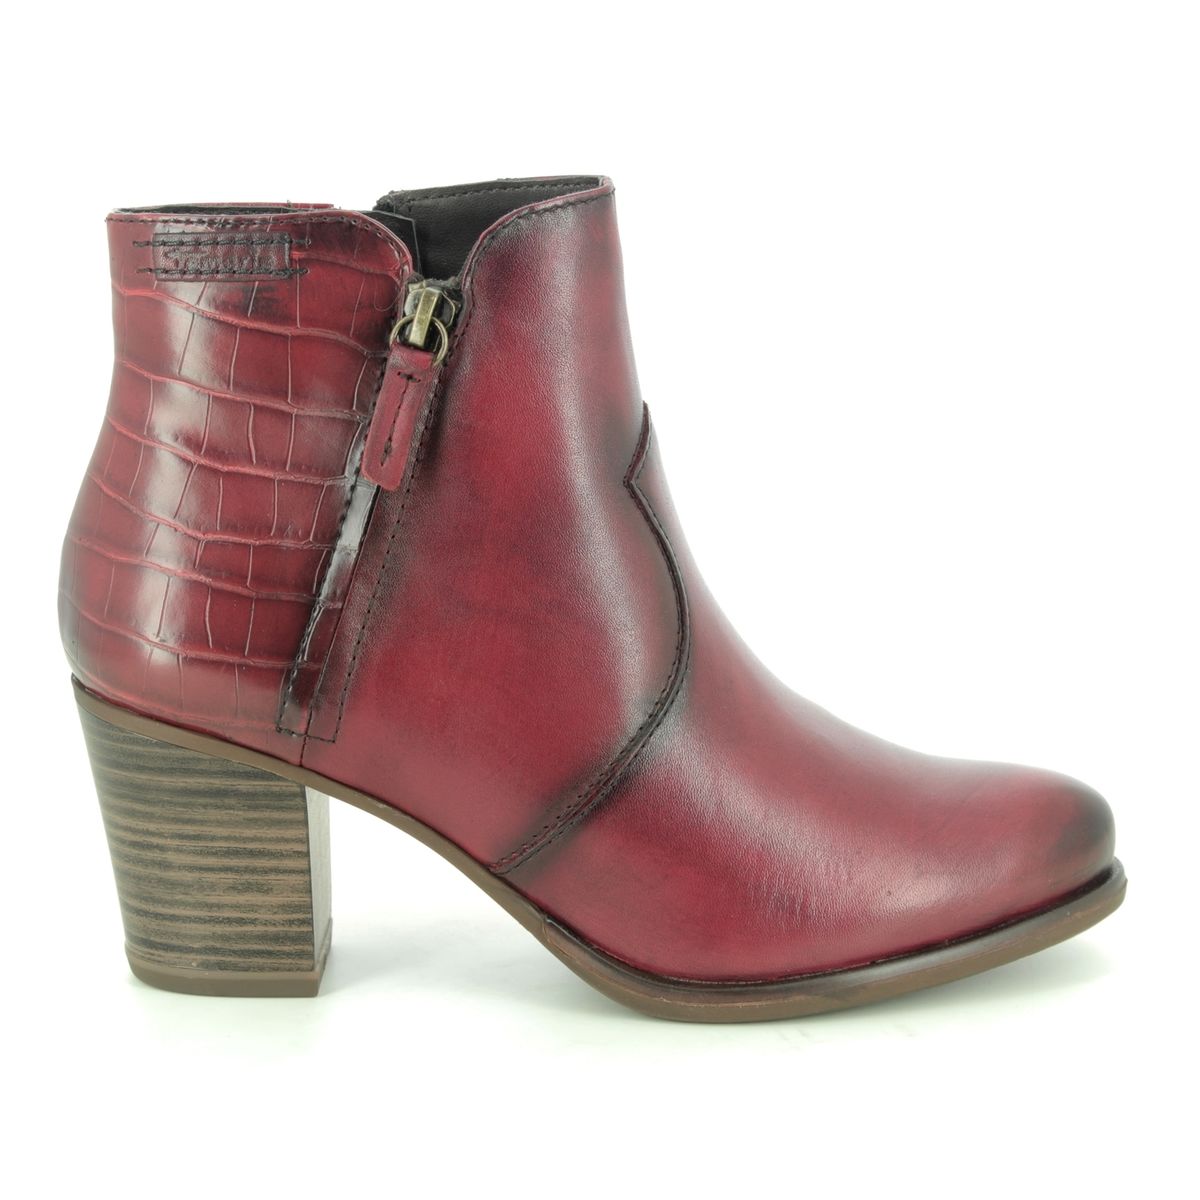 Tamaris 25338-25-585 leather Ankle Boots